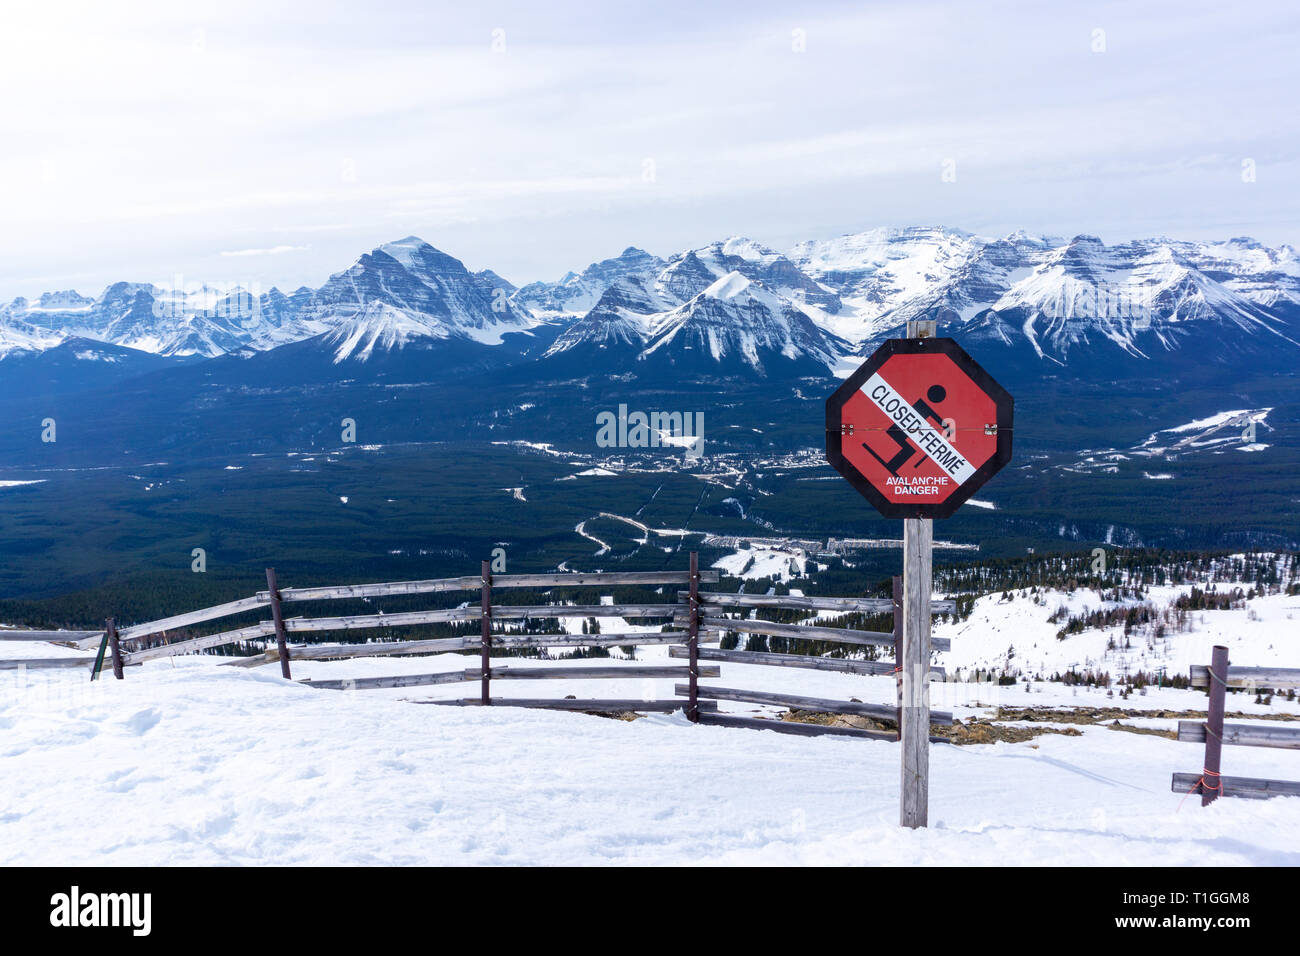 An avalanche danger warning sign prevents skiers from venturing into dangerous territory with the picturesque Canadian Rockies of Alberta in the backg Stock Photo